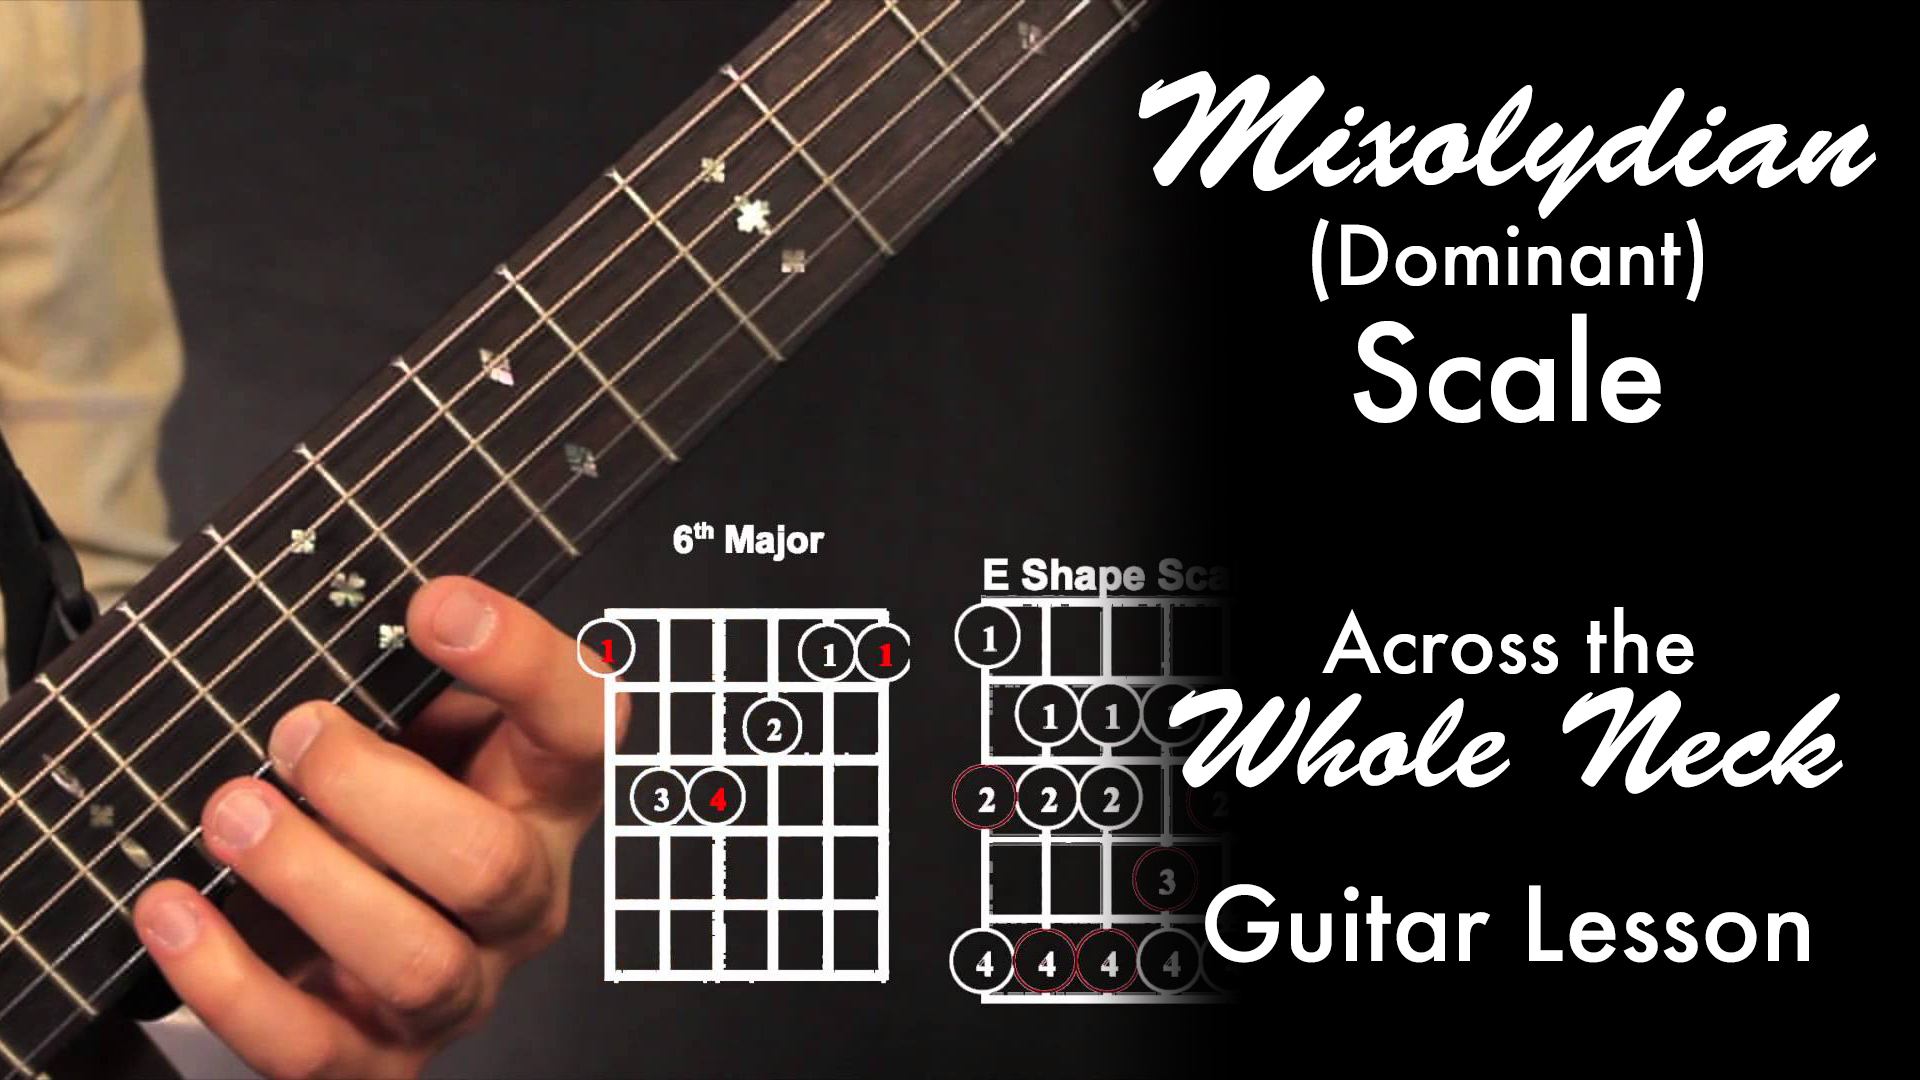 mixolydian scale lessons guitar neck dominant whole